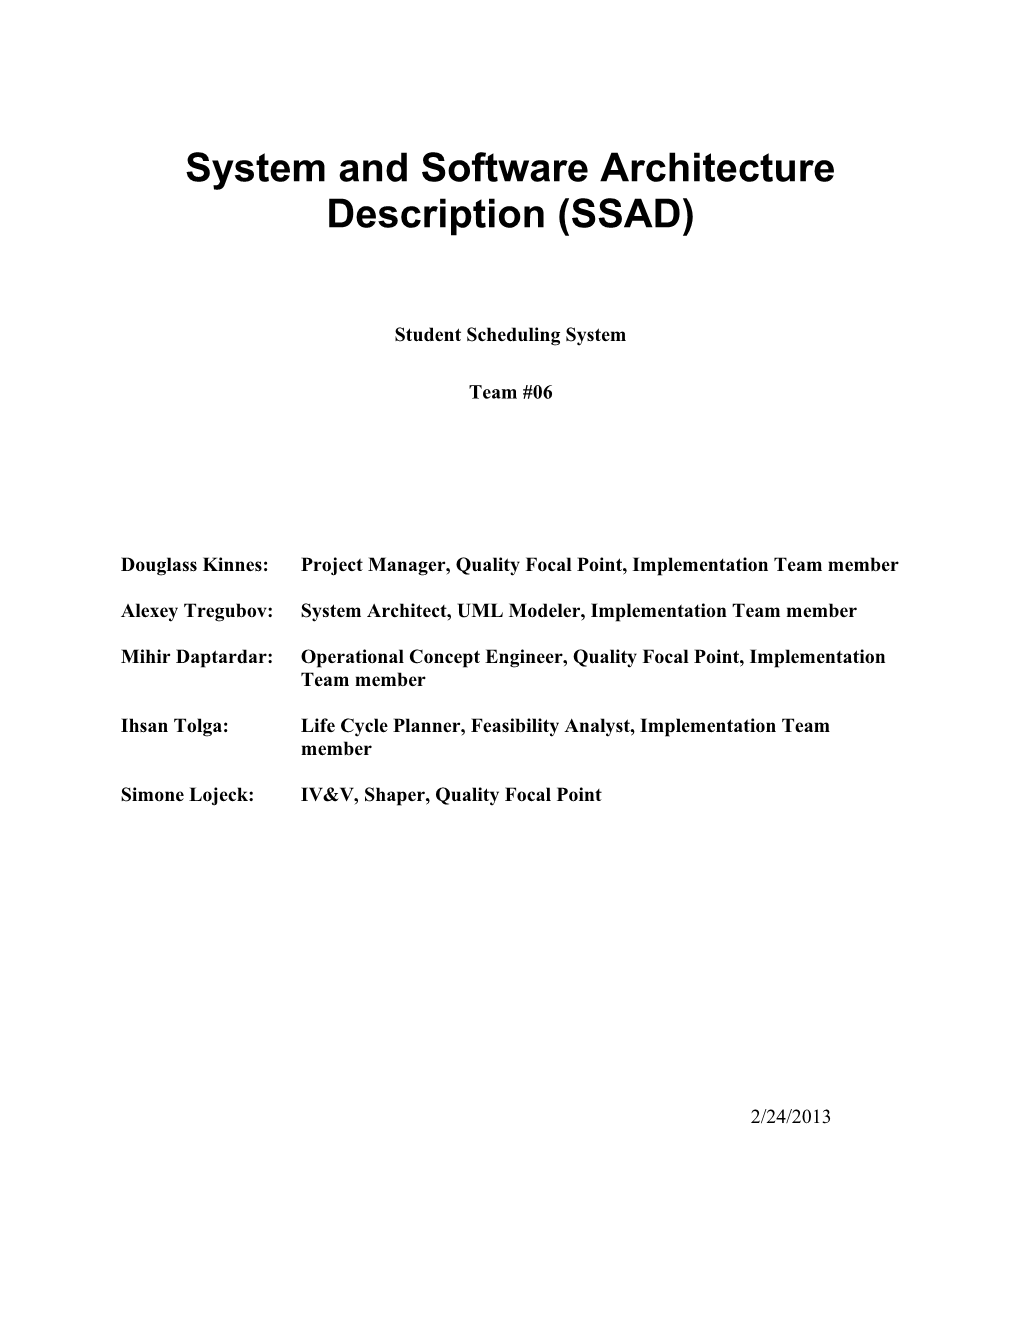 System and Software Architecture Description (SSAD) for Student Scheduling System